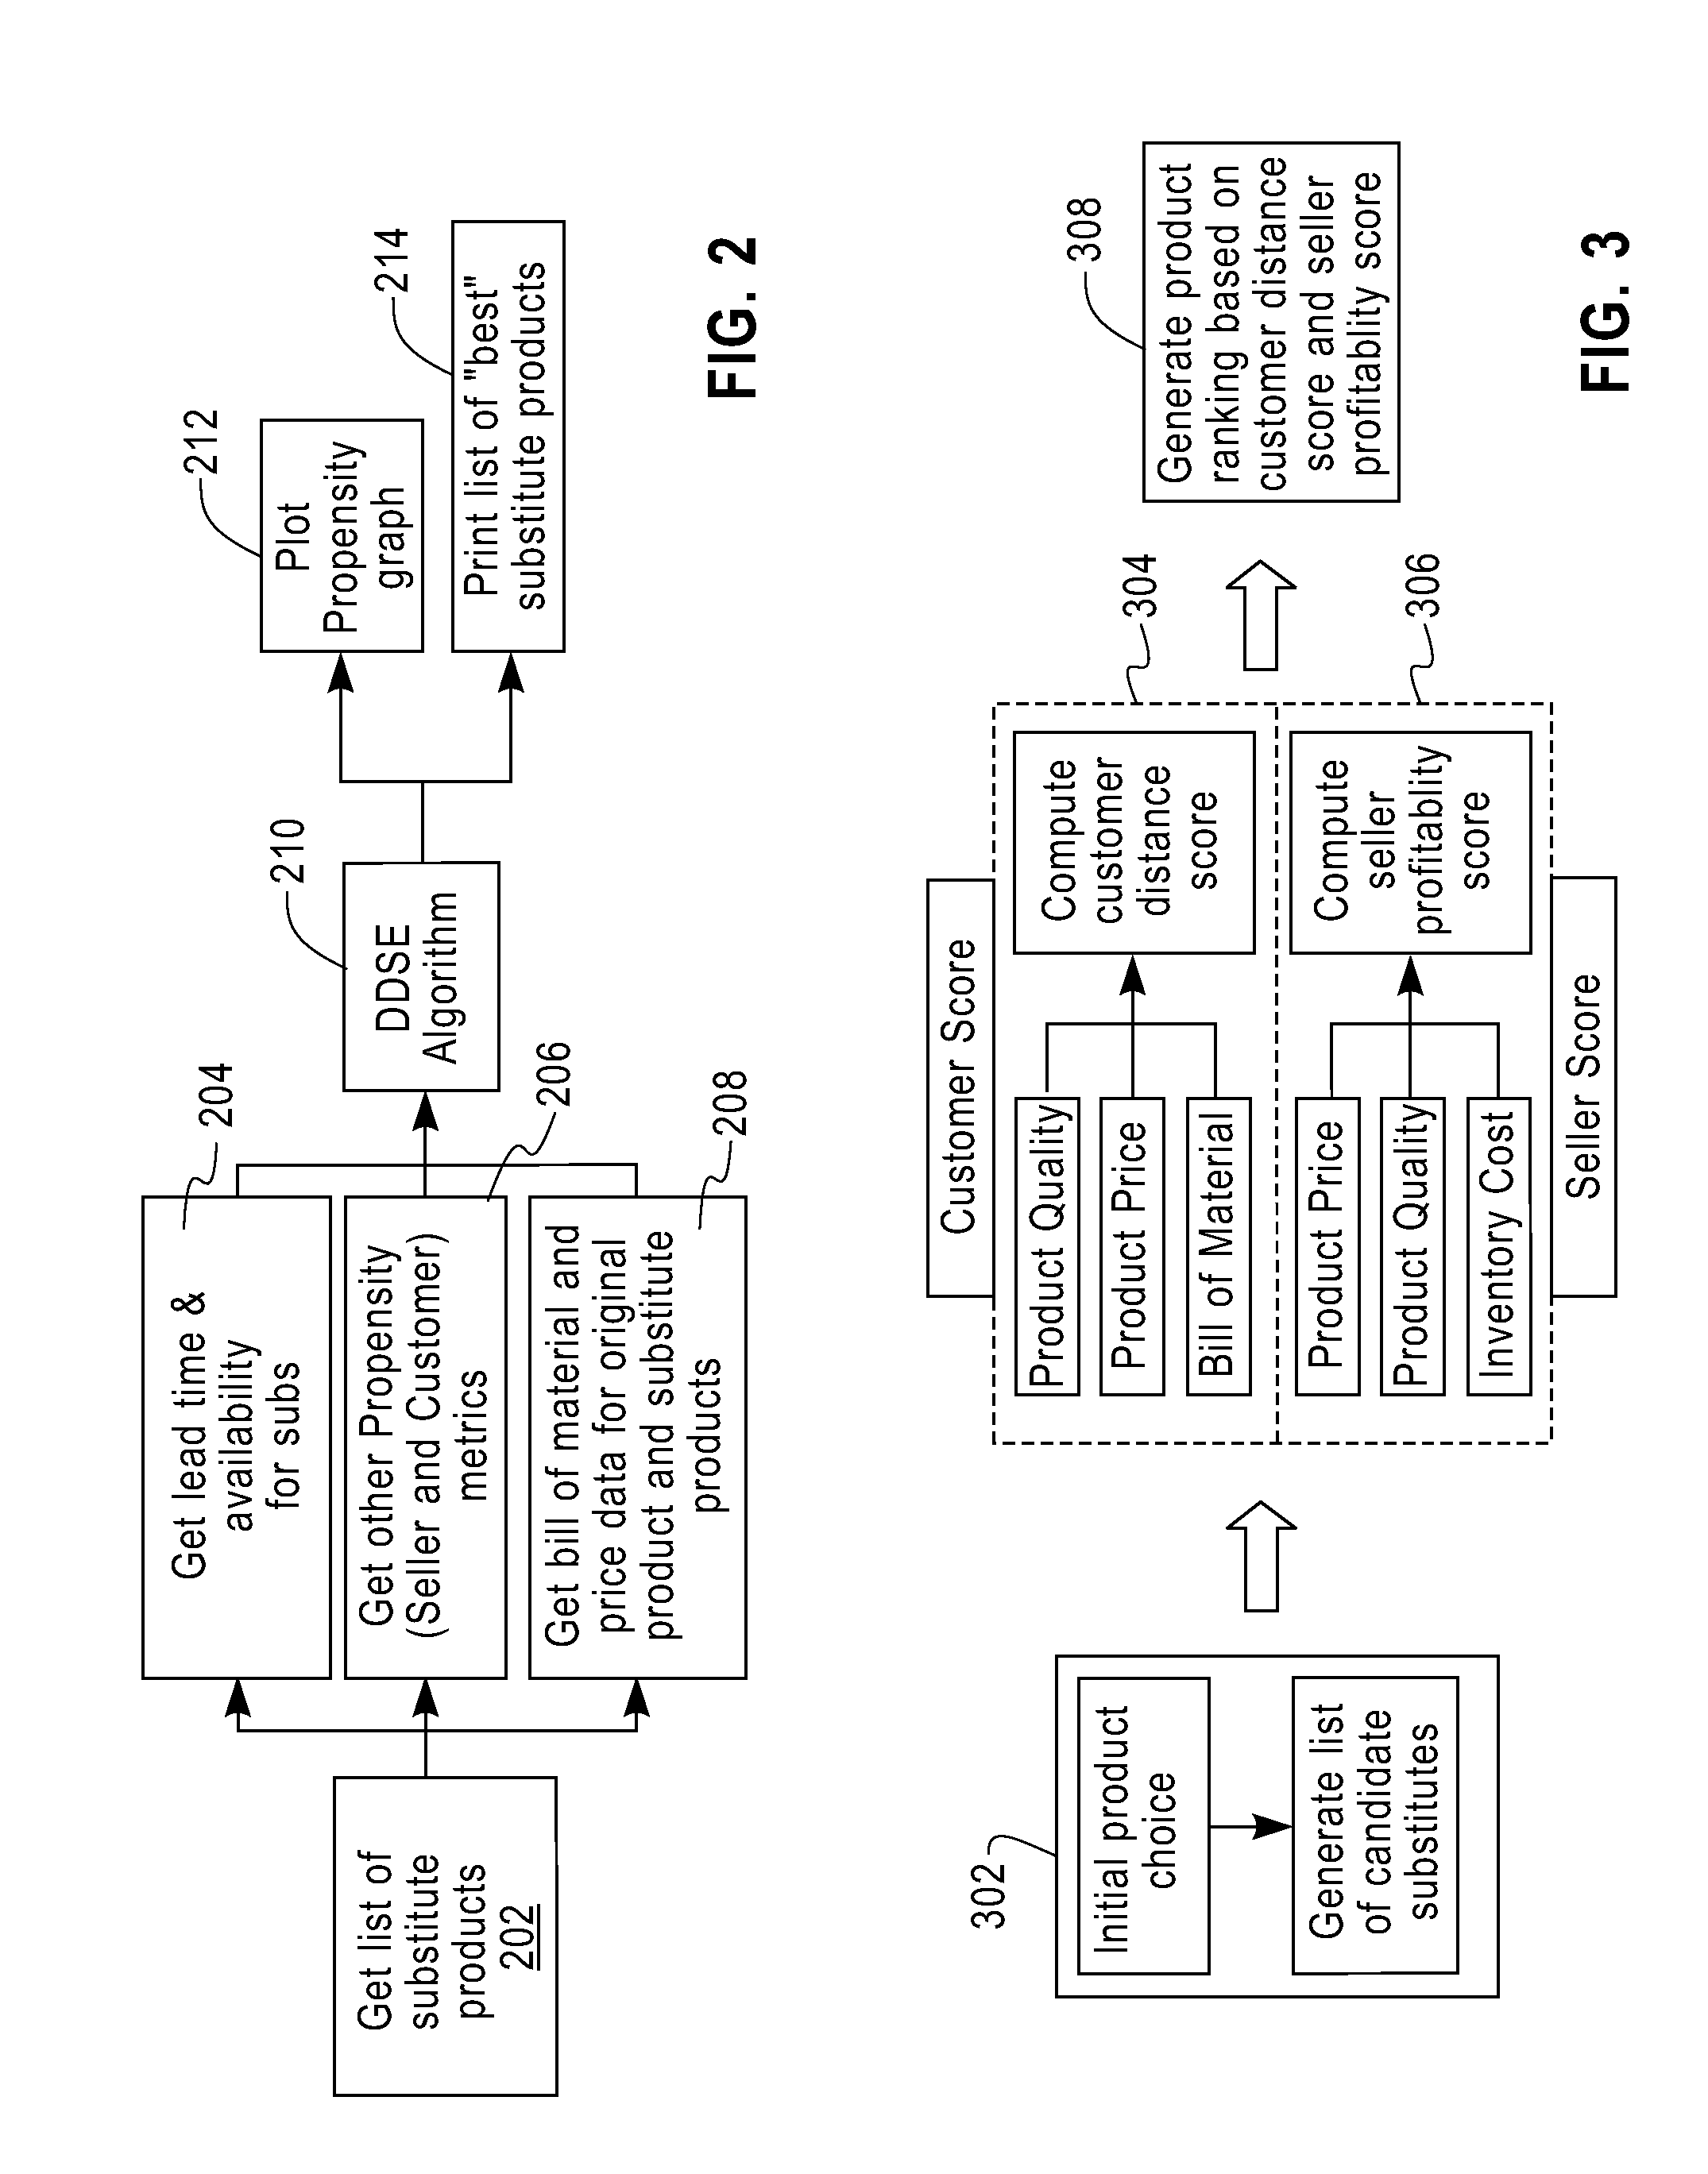 Method and system for evaluating product substitutions along multiple criteria in response to a sales opportunity